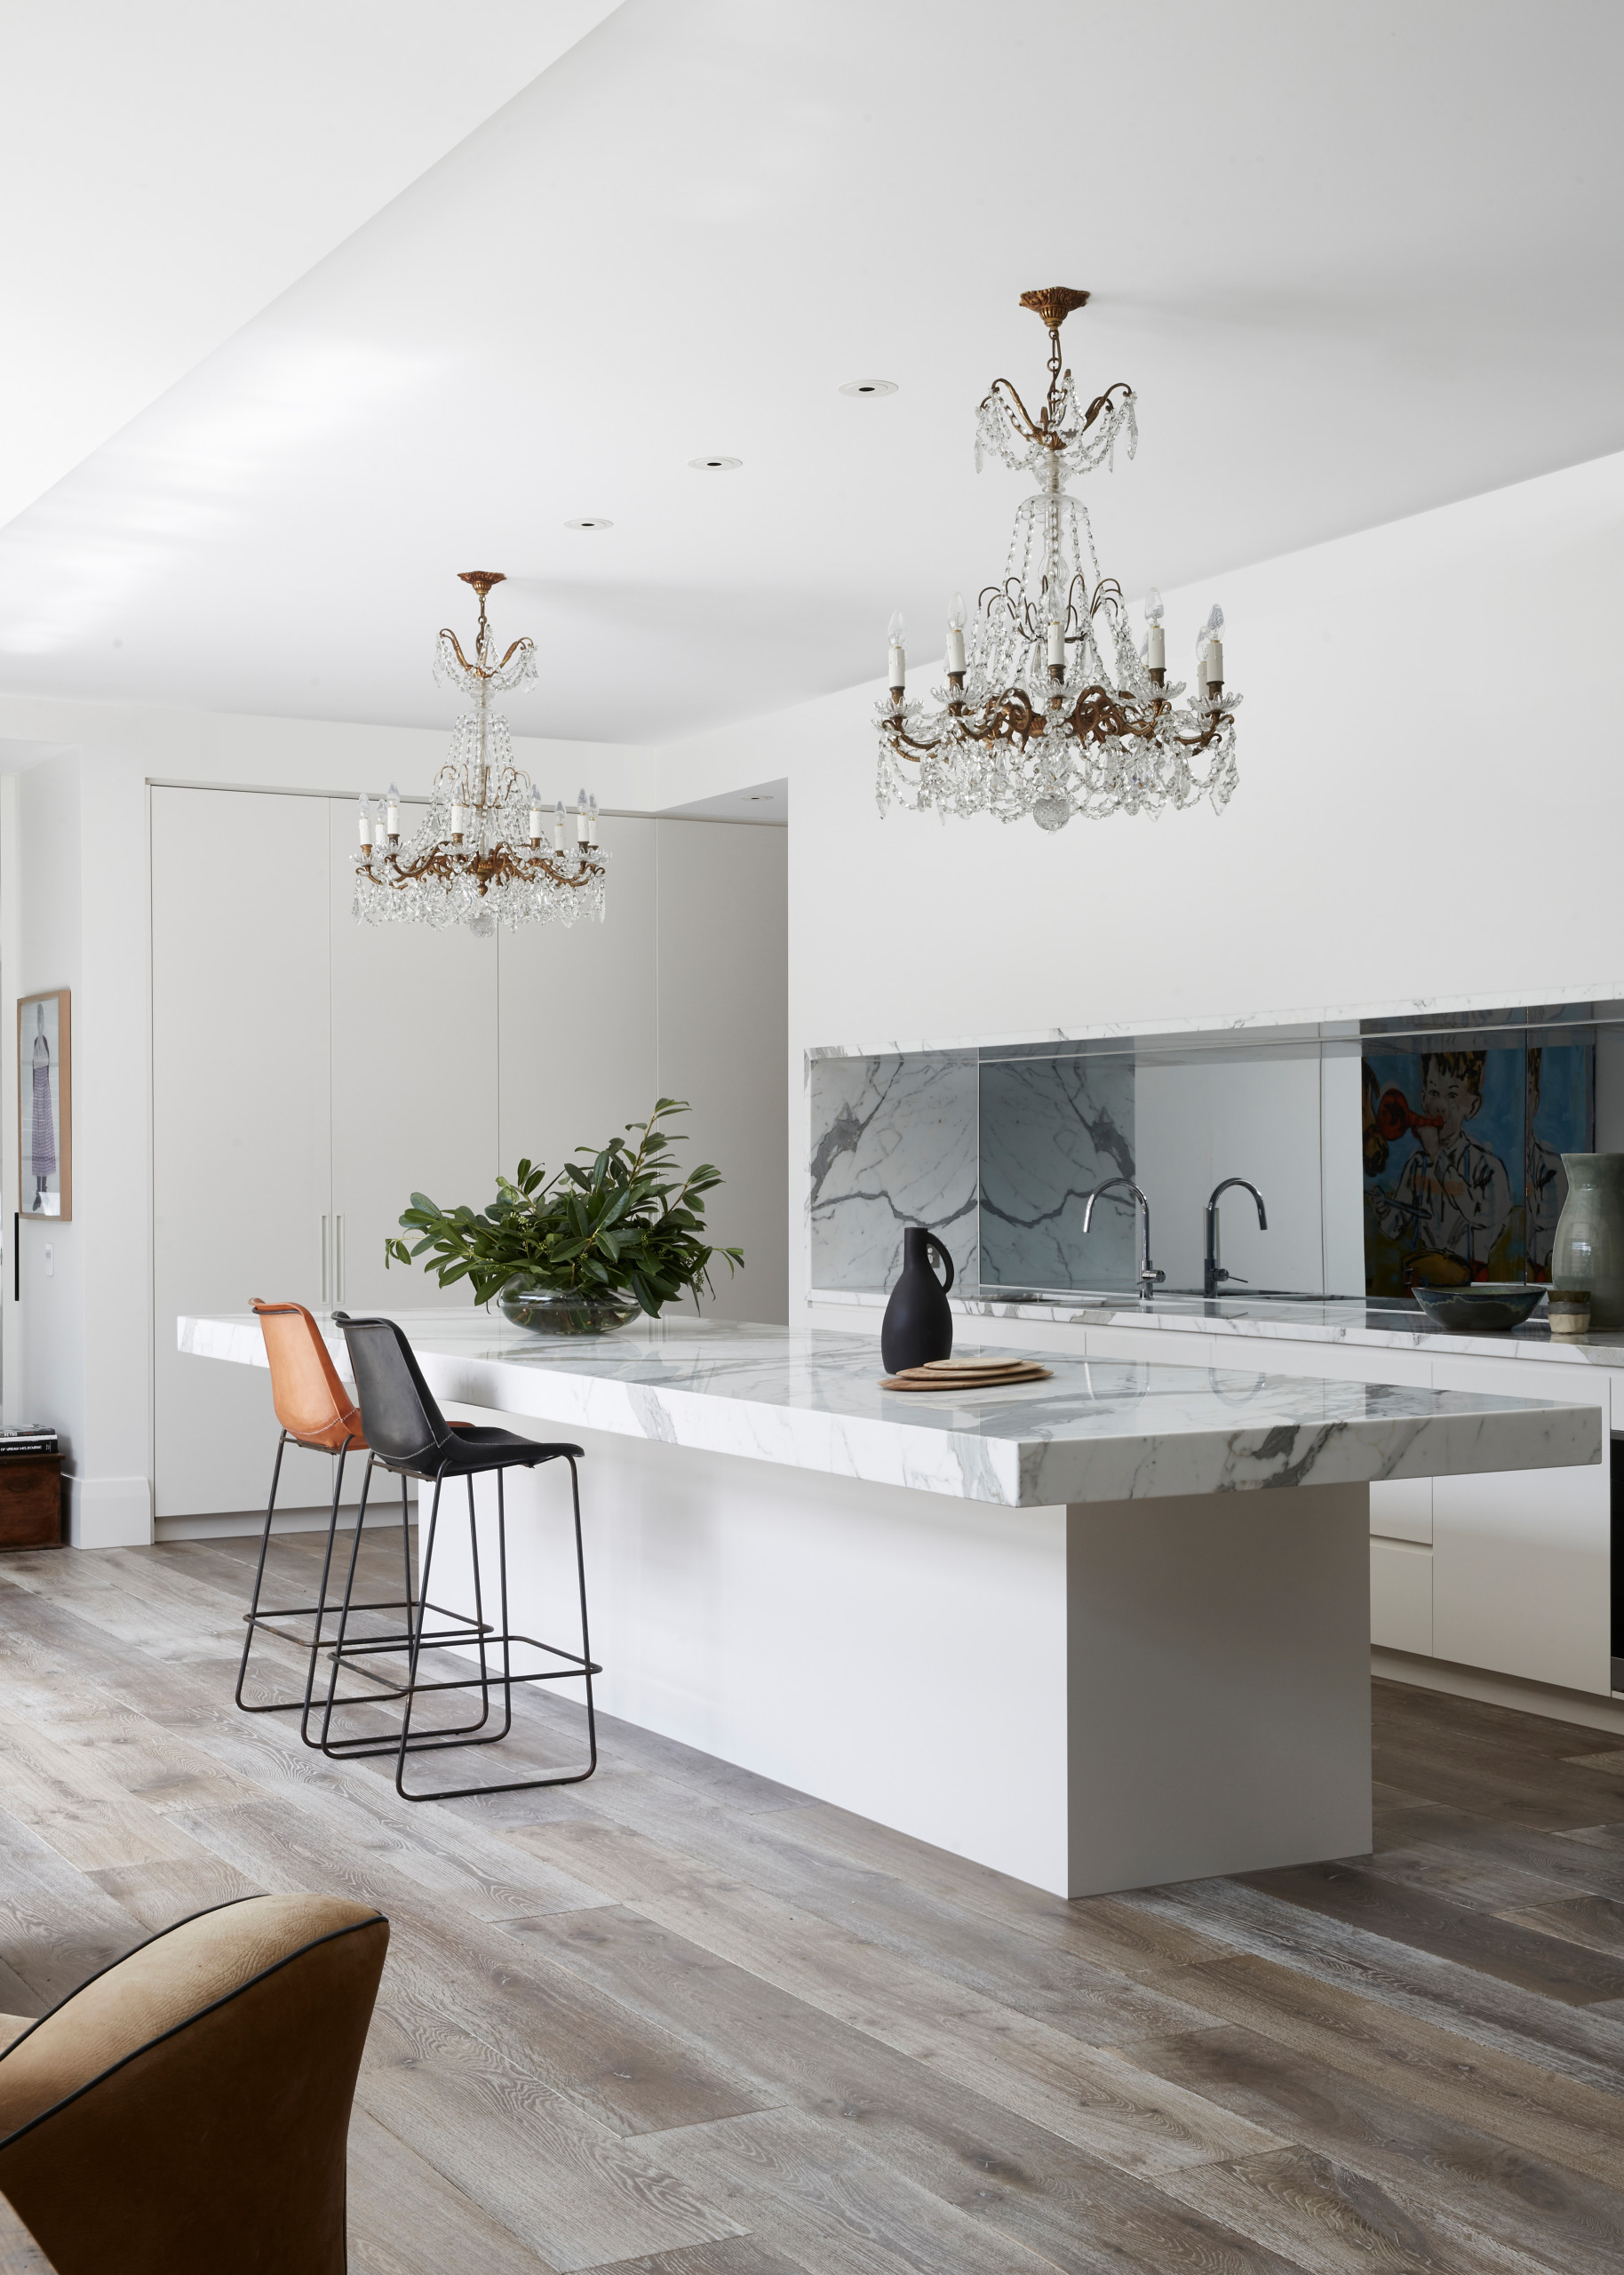 How to Design a Stylish White Kitchen with Unusual Accessories and Decor -  Dynamic Group